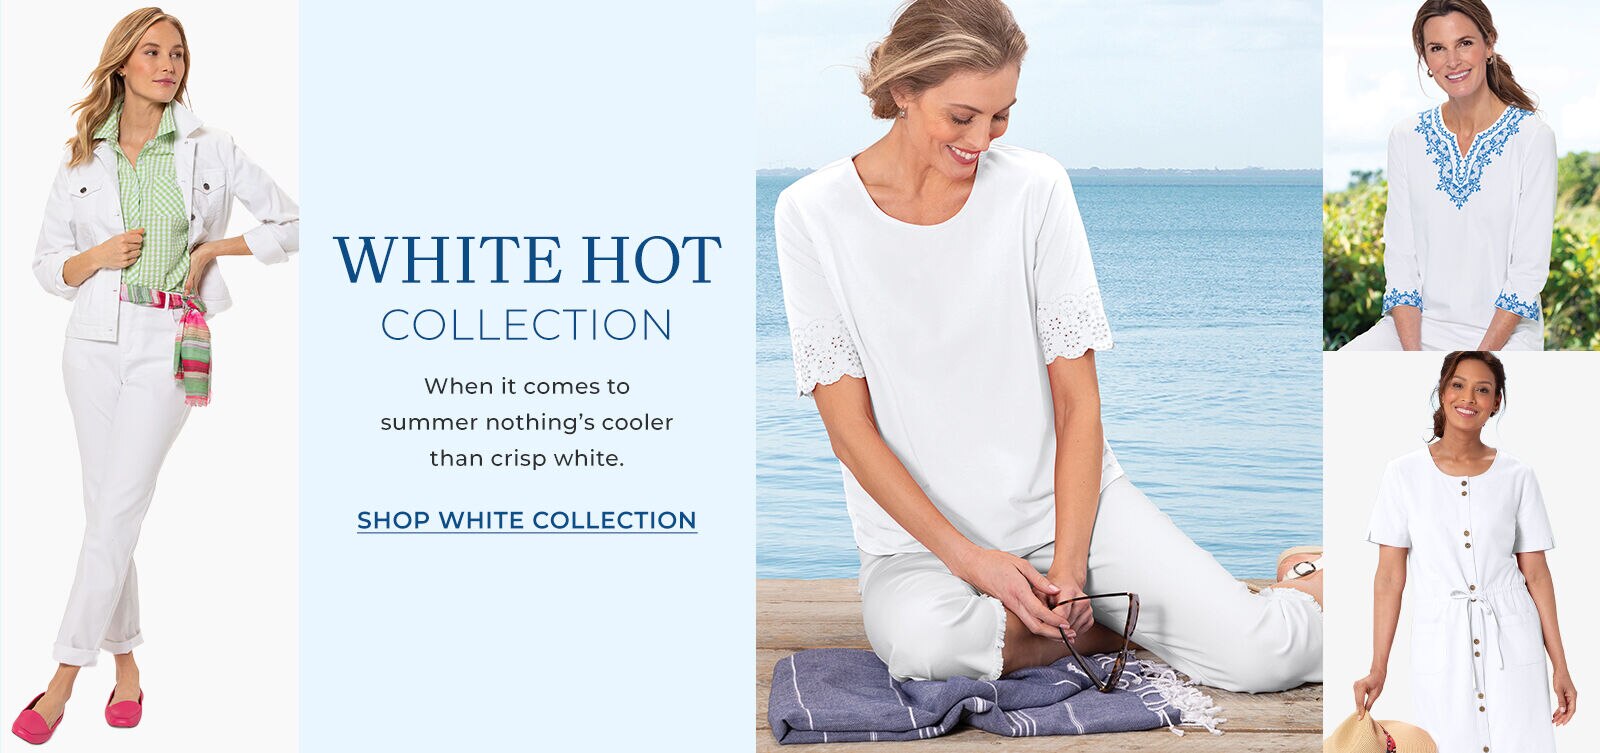 white hot collection when it comes to summer nothing's cooler than crisp white. shop white collection